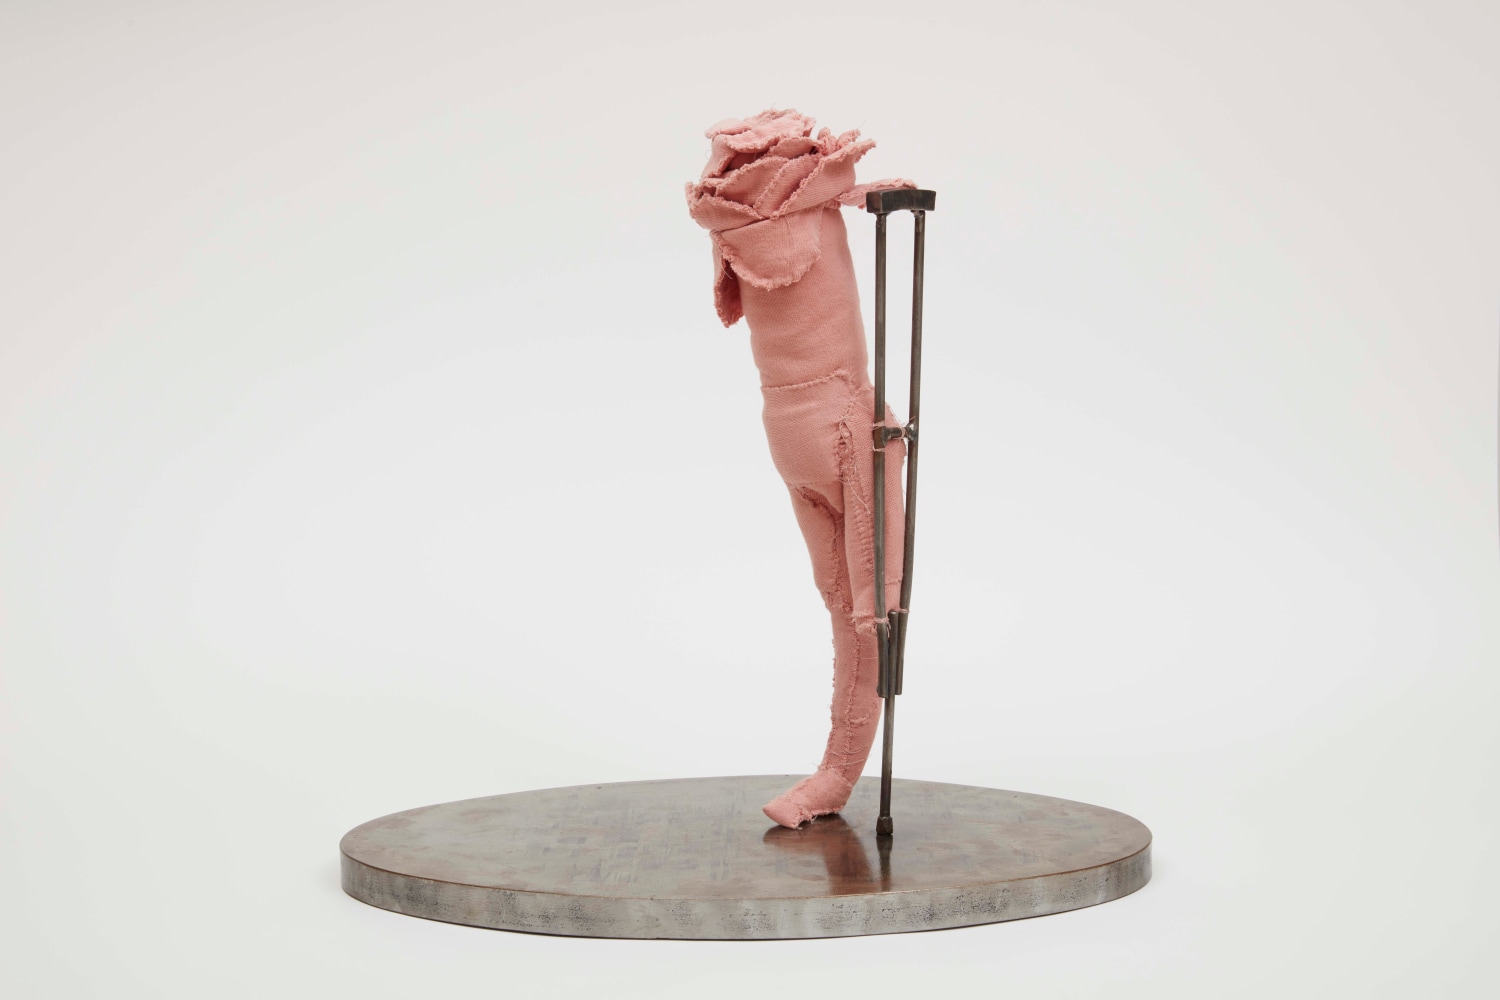 Louise Bourgeois

Topiary, 1998

fabric, steel, glass, wood

74 x 28 x 18 inches (188 x 71.1 x 45.7 cm)

(BOUR-3698)